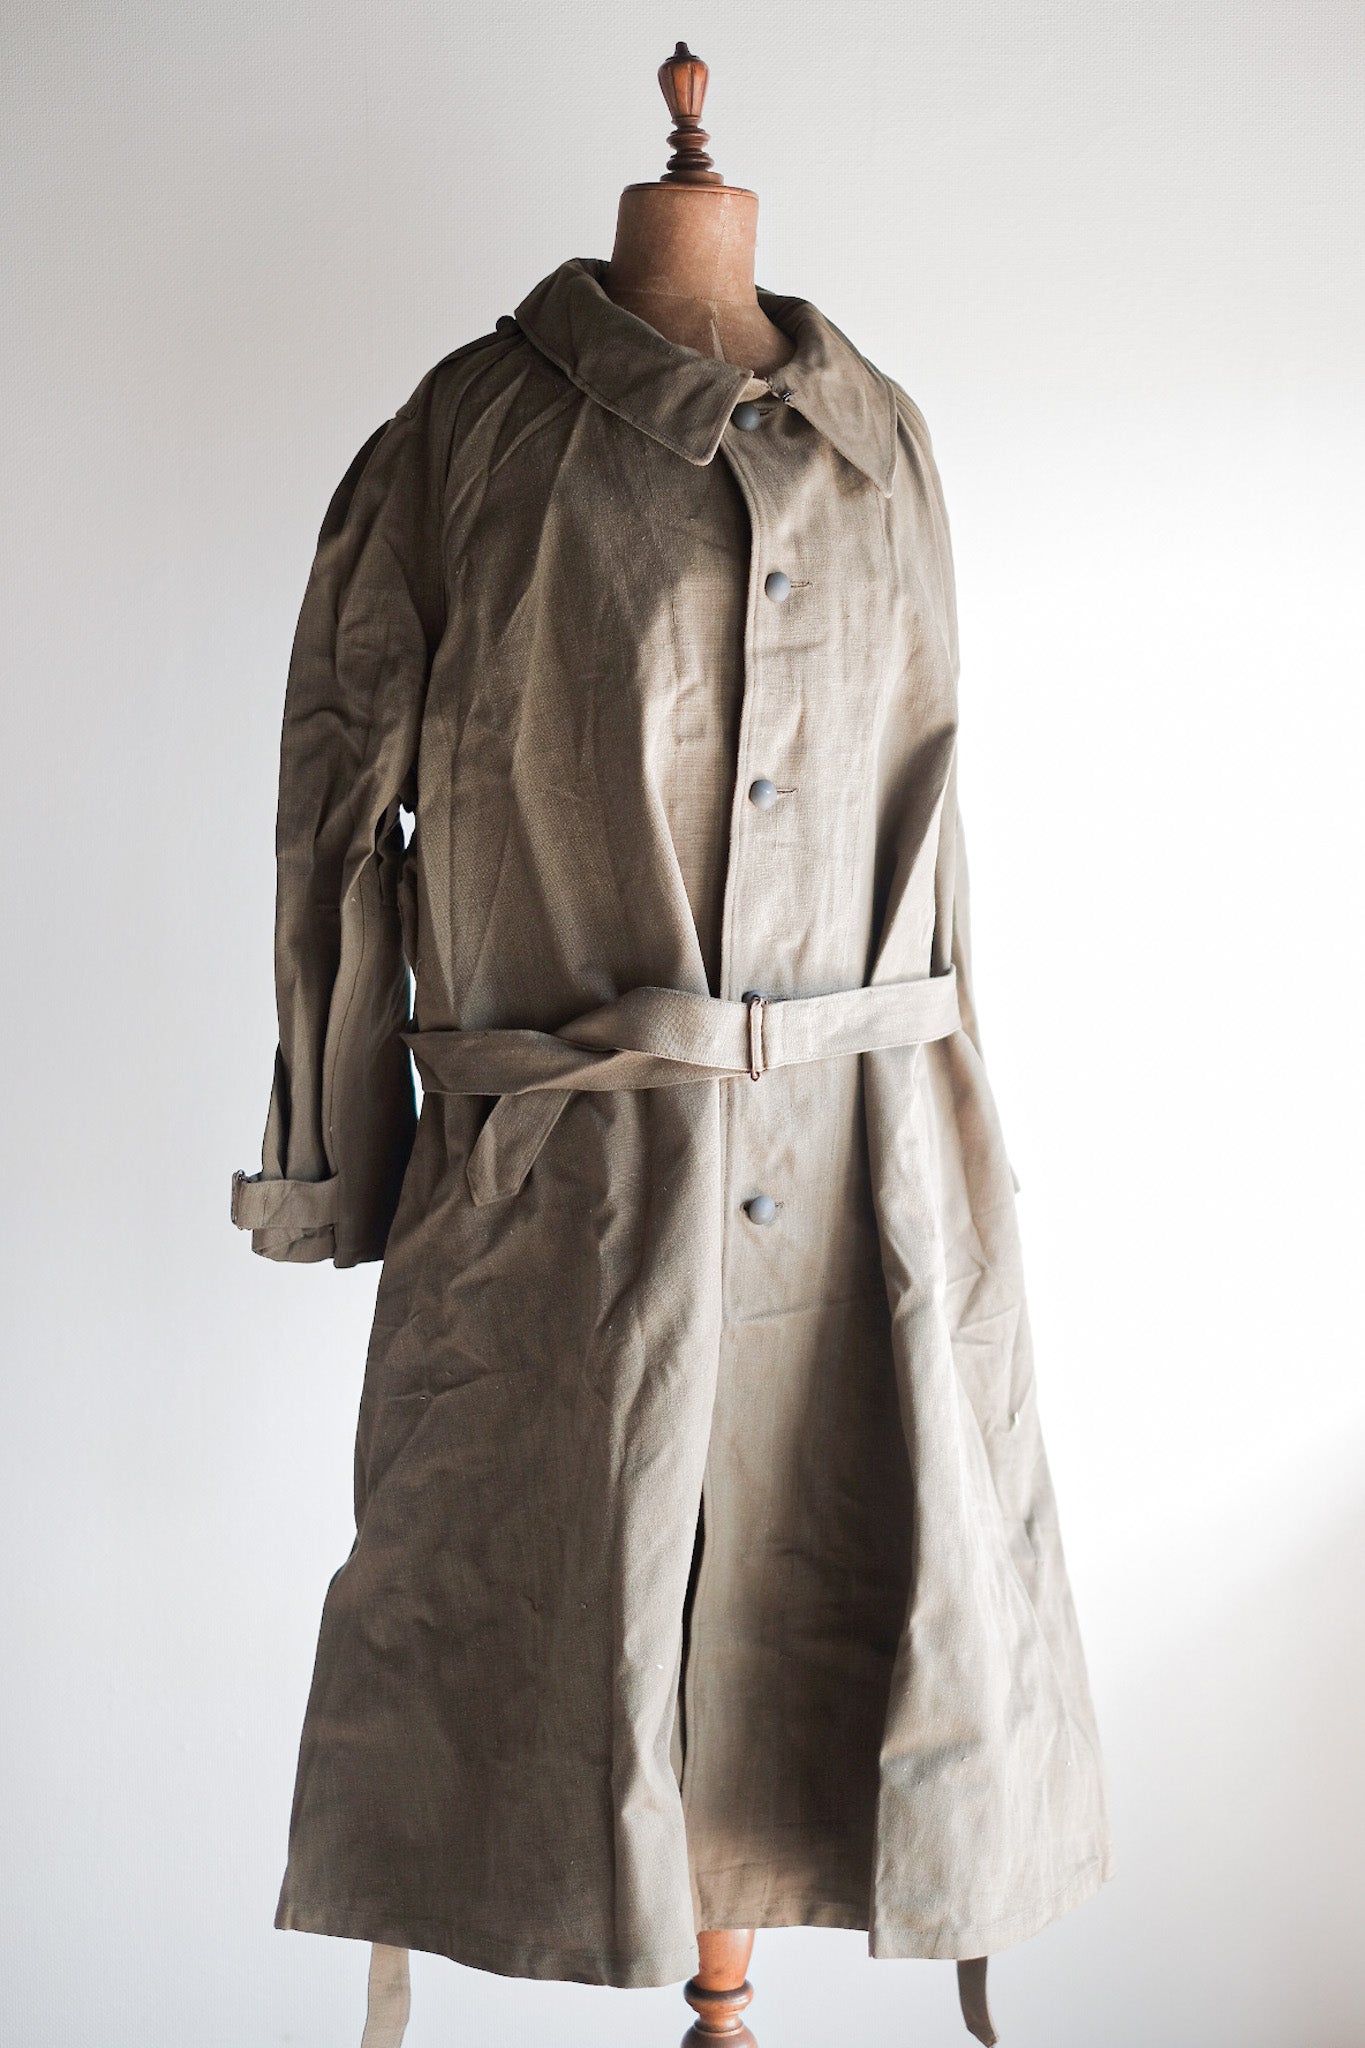 [~ 50's] French Army M35 Motorcycle Coat "Cotton Linen Type" "Dead Stock"